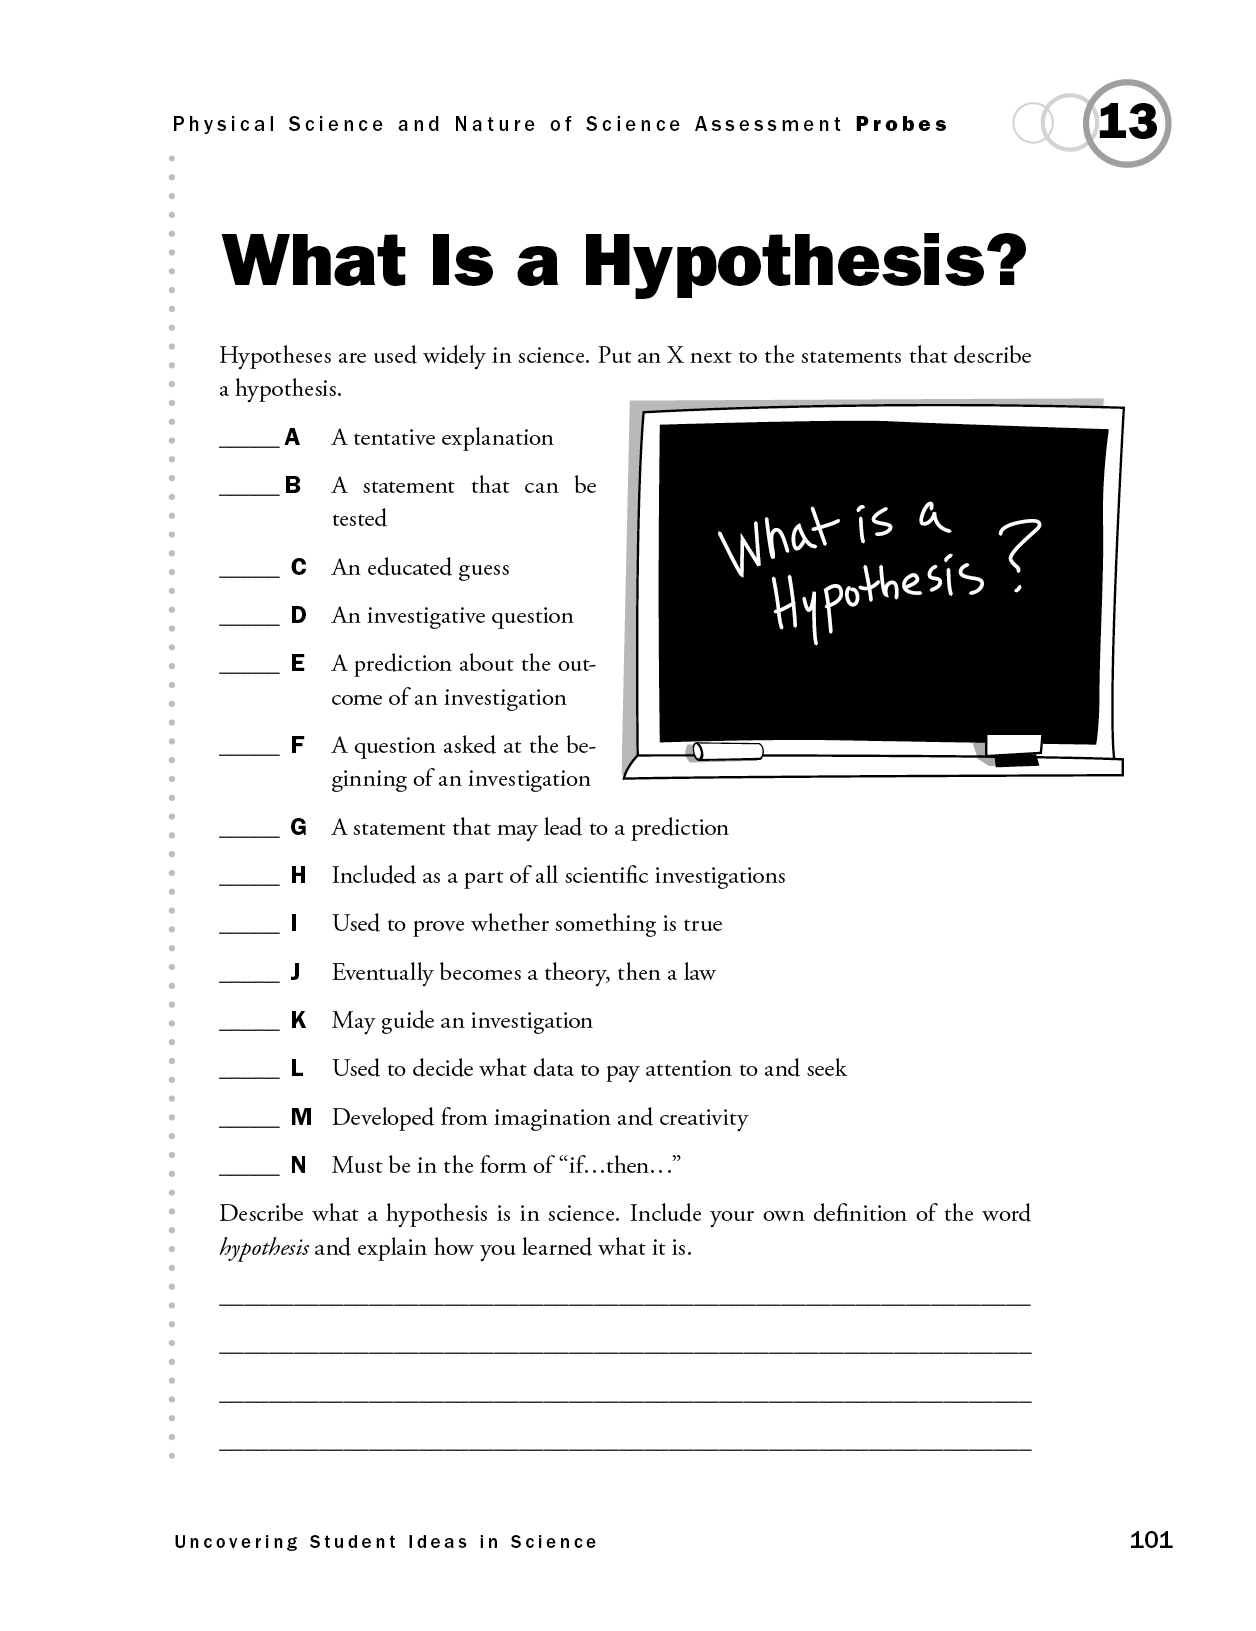 hypothesis making activity